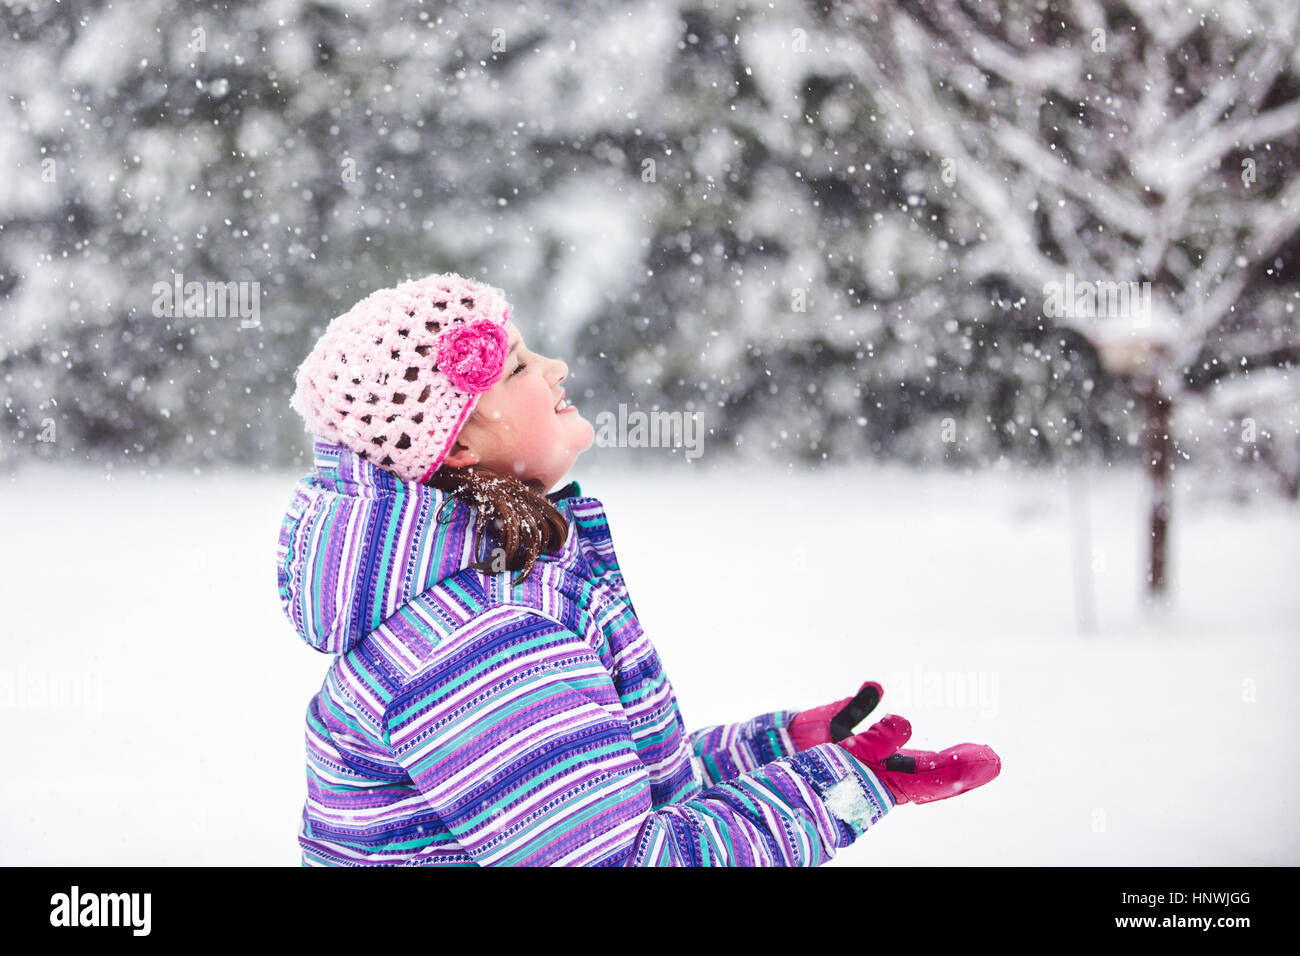 Girl cupping hands to catch falling snow Stock Photo